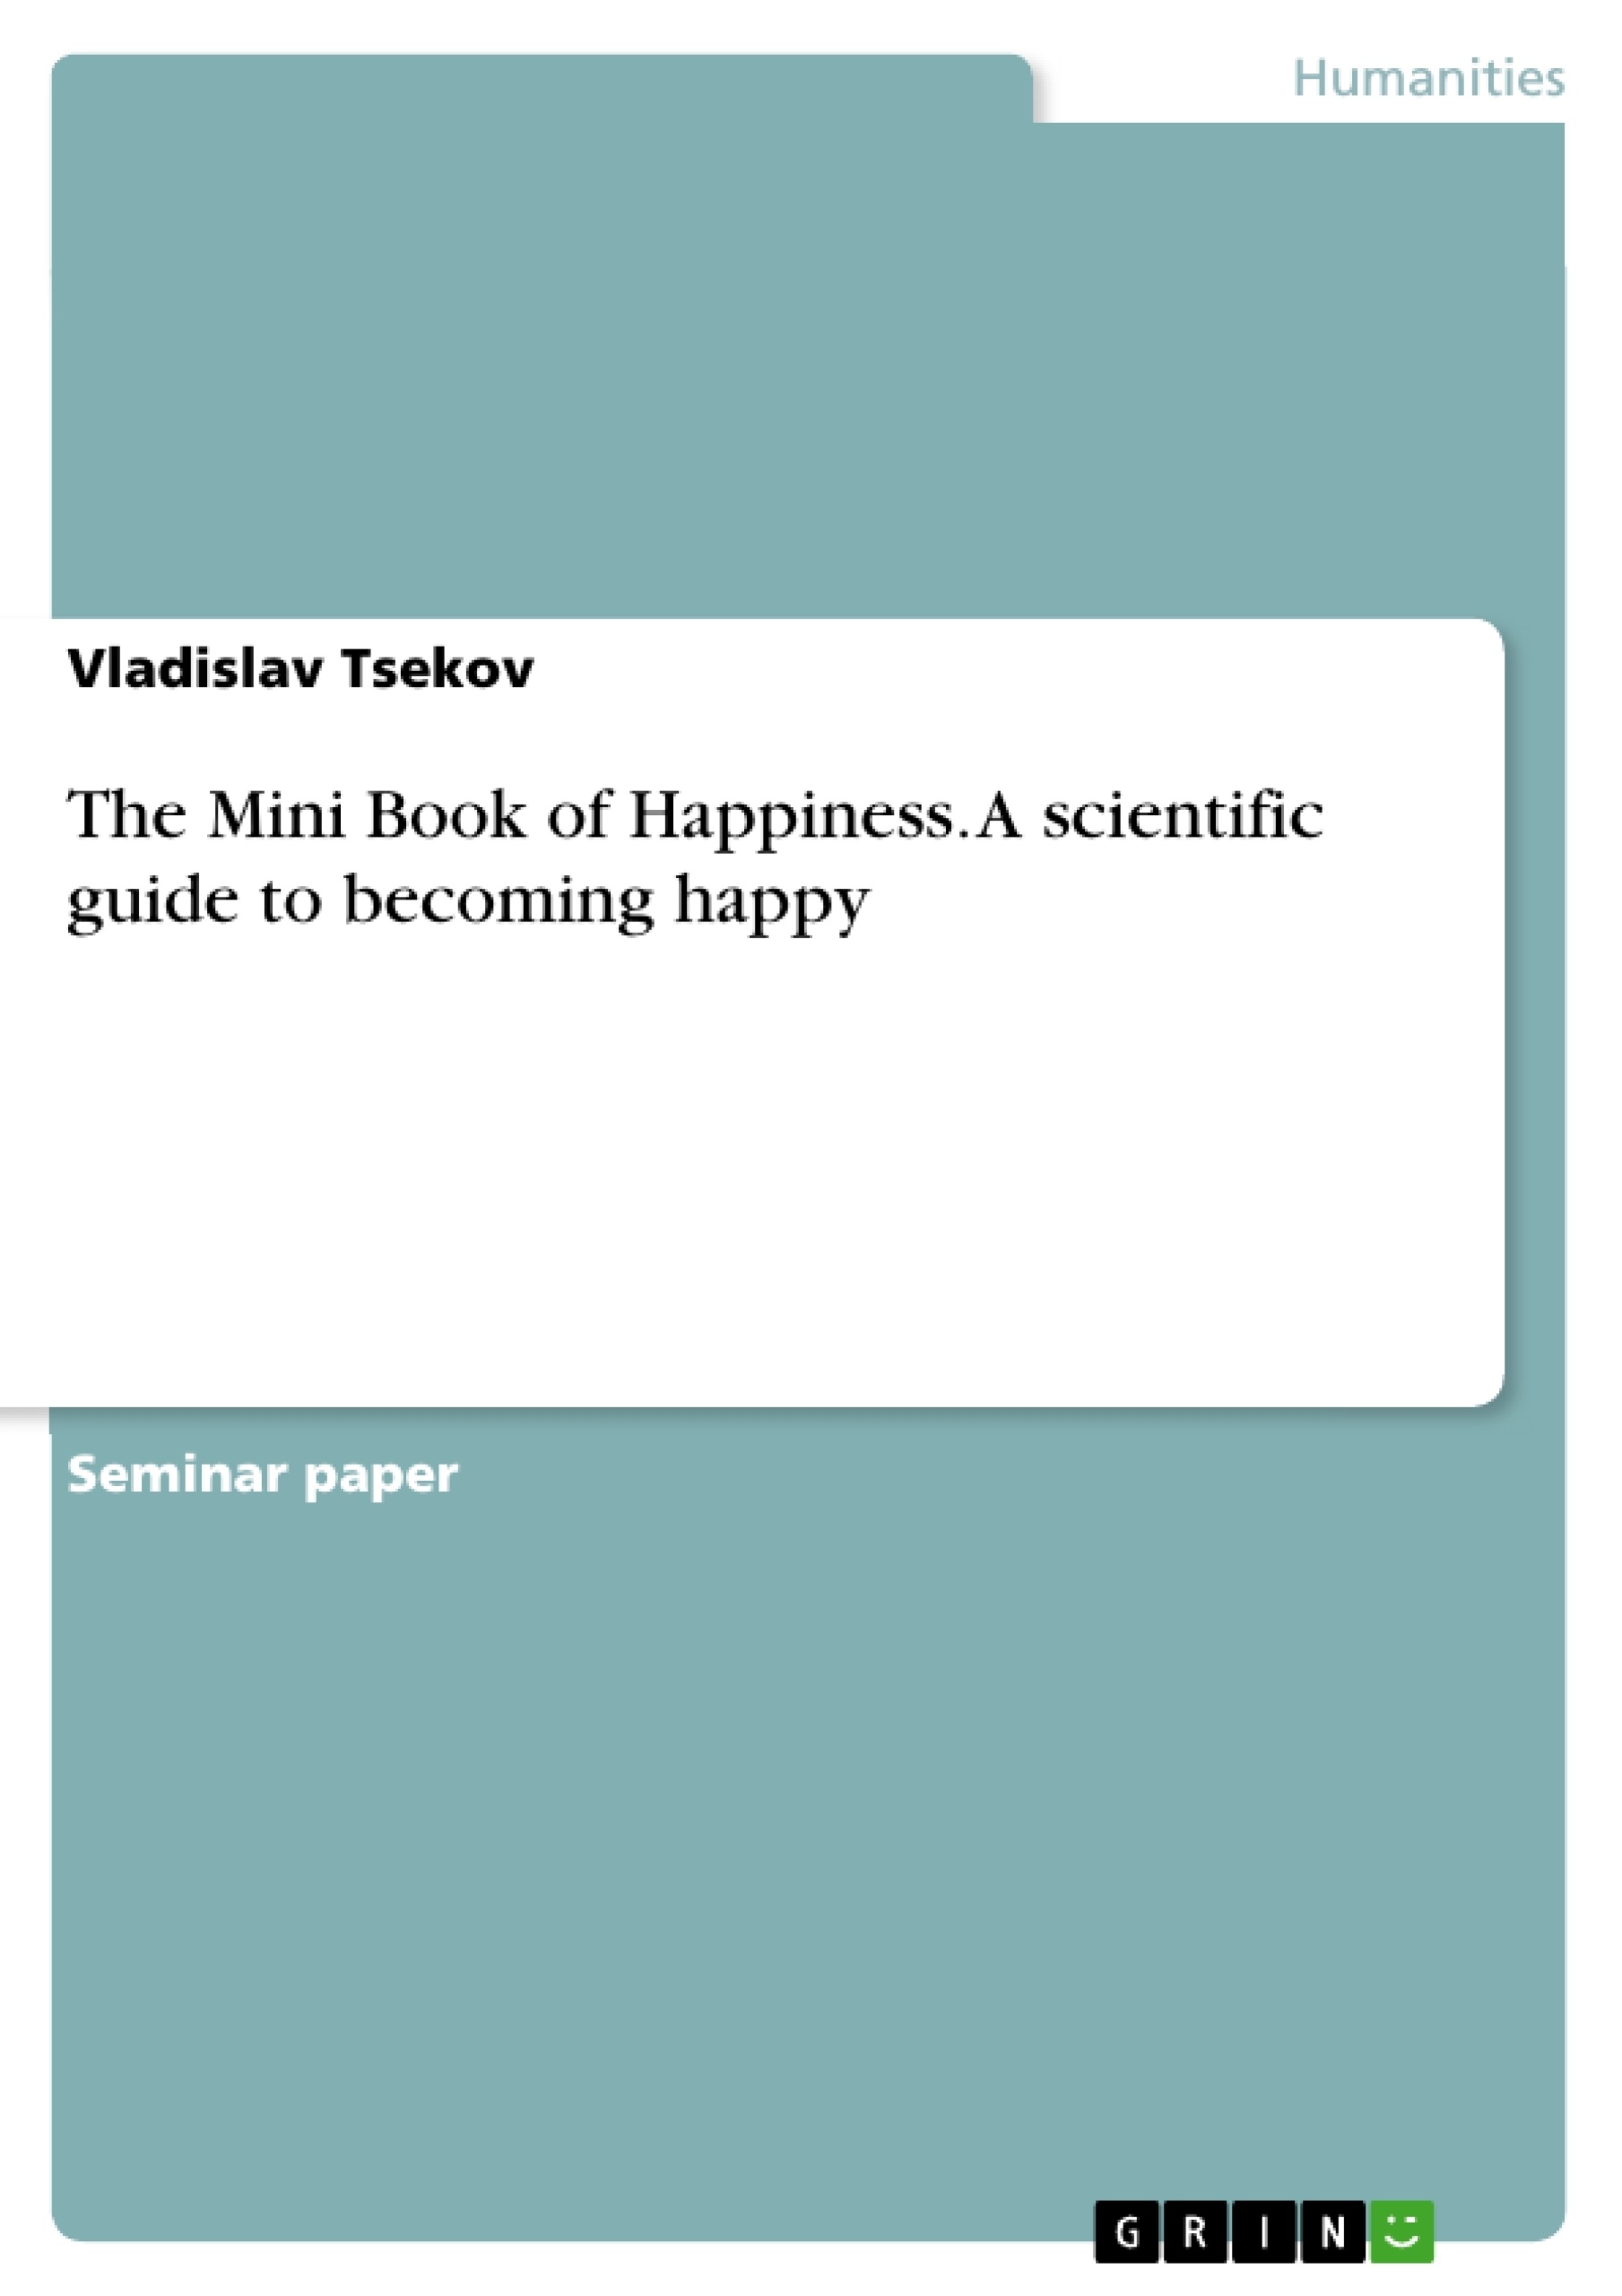 Titel: The Mini Book of Happiness. A scientific guide to becoming happy